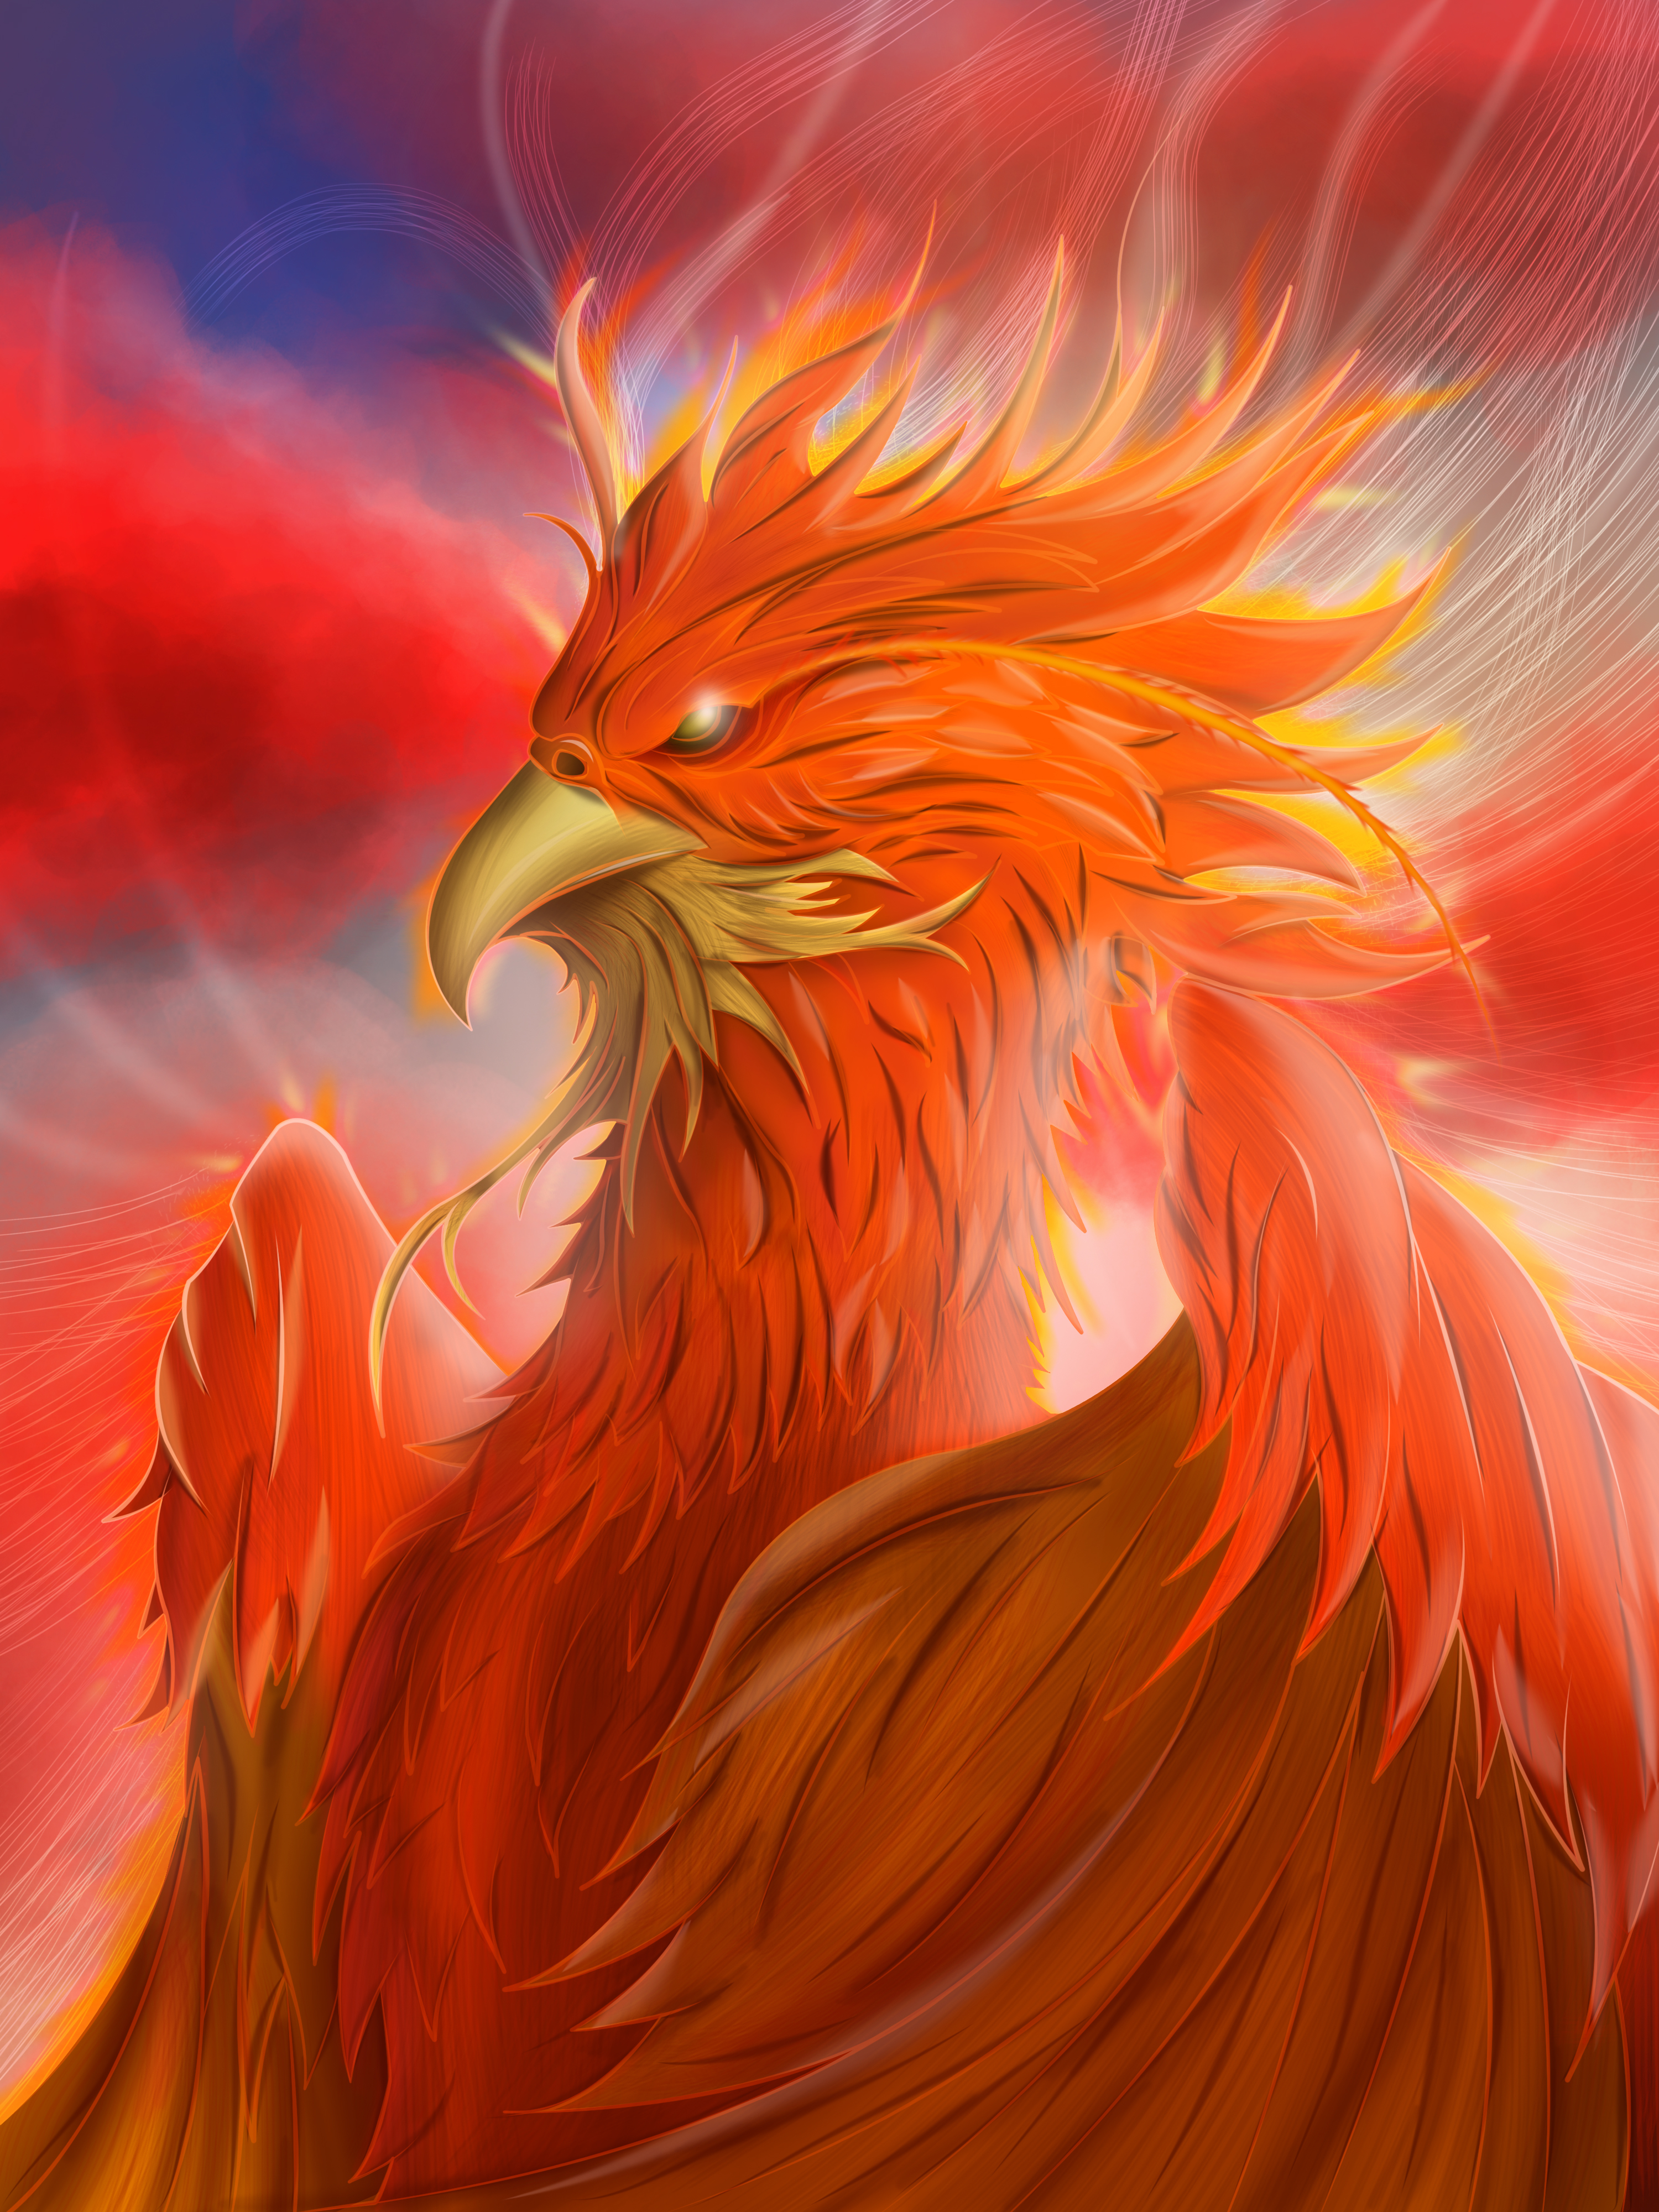 The Phoenix of Justice